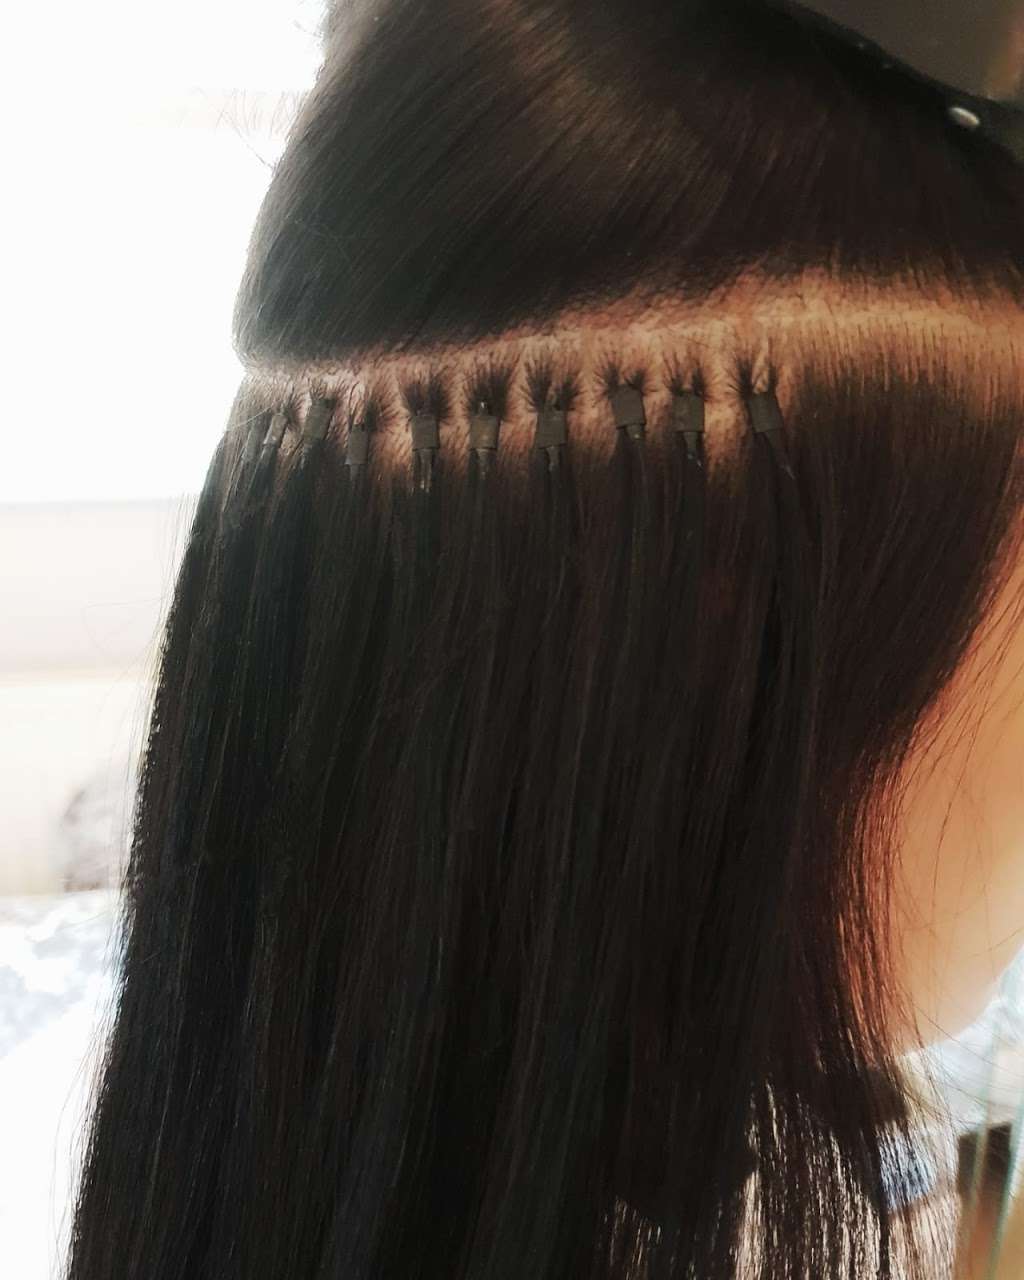 Lux Hair Extension | 23 Manor Way, Grays RM17 6RN, UK | Phone: 07383 966638